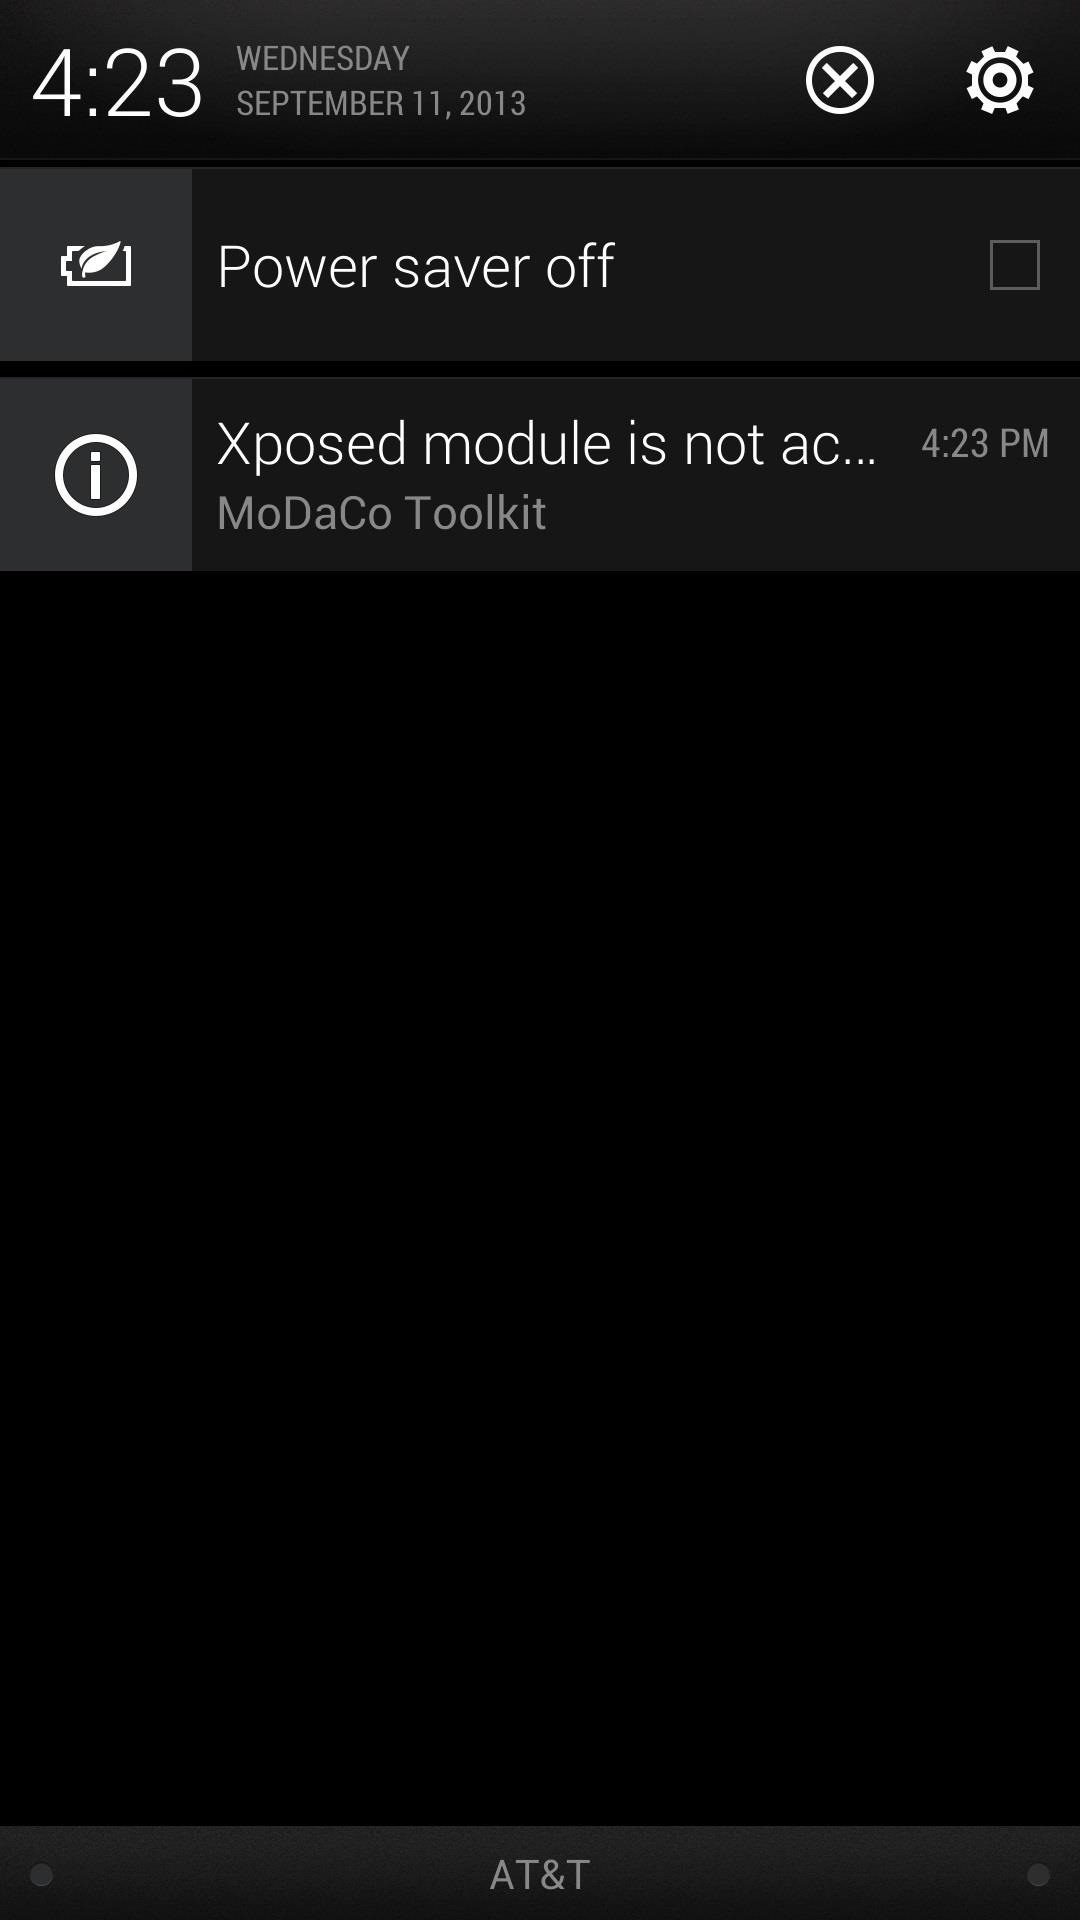 How to Install the Xposed Framework on Your HTC One to Easily Mod Your Phone